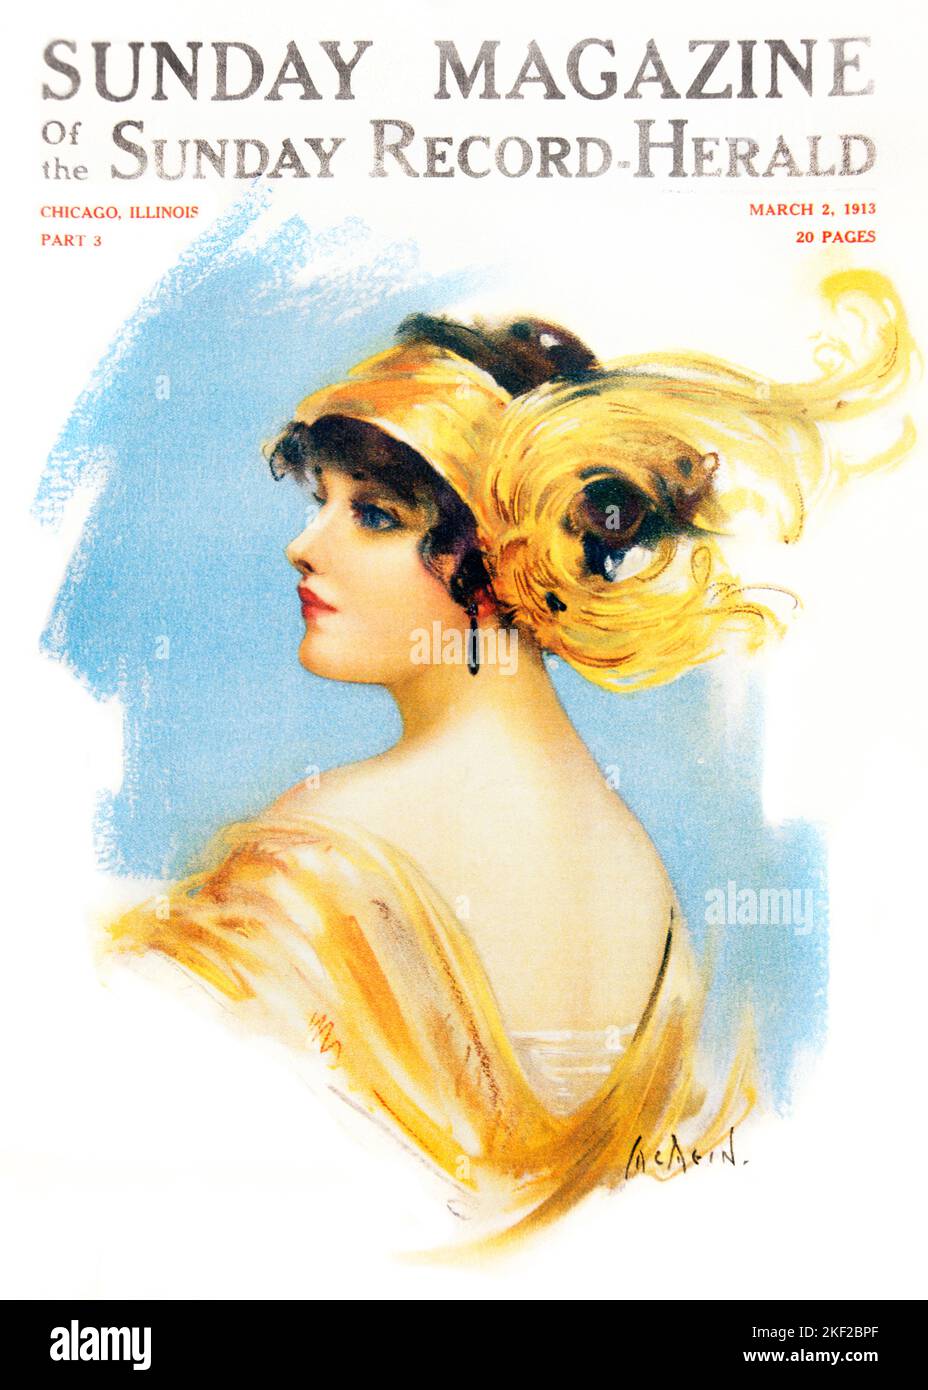 1910s PROFILE PORTRAIT BRUNETTE BEAUTY WEARING GOLDEN YELLOW HEADBAND WITH LARGE PLUME FEATHER AND ELEGANT LOW BACK EVENING GOWN - kh13577 NAW001 HARS LUXURY COPY SPACE LADIES GOLDEN PERSONS CONFIDENCE HEADBAND BRUNETTE DREAMS HEAD AND SHOULDERS STYLES AND SOCIETY WEALTH PRIDE UPSCALE DARK HAIR AFFLUENT PLUME STYLISH BLACK HAIR FASHIONS HERALD LOW WELL-TO-DO YOUNG ADULT WOMAN CAUCASIAN ETHNICITY OLD FASHIONED Stock Photo